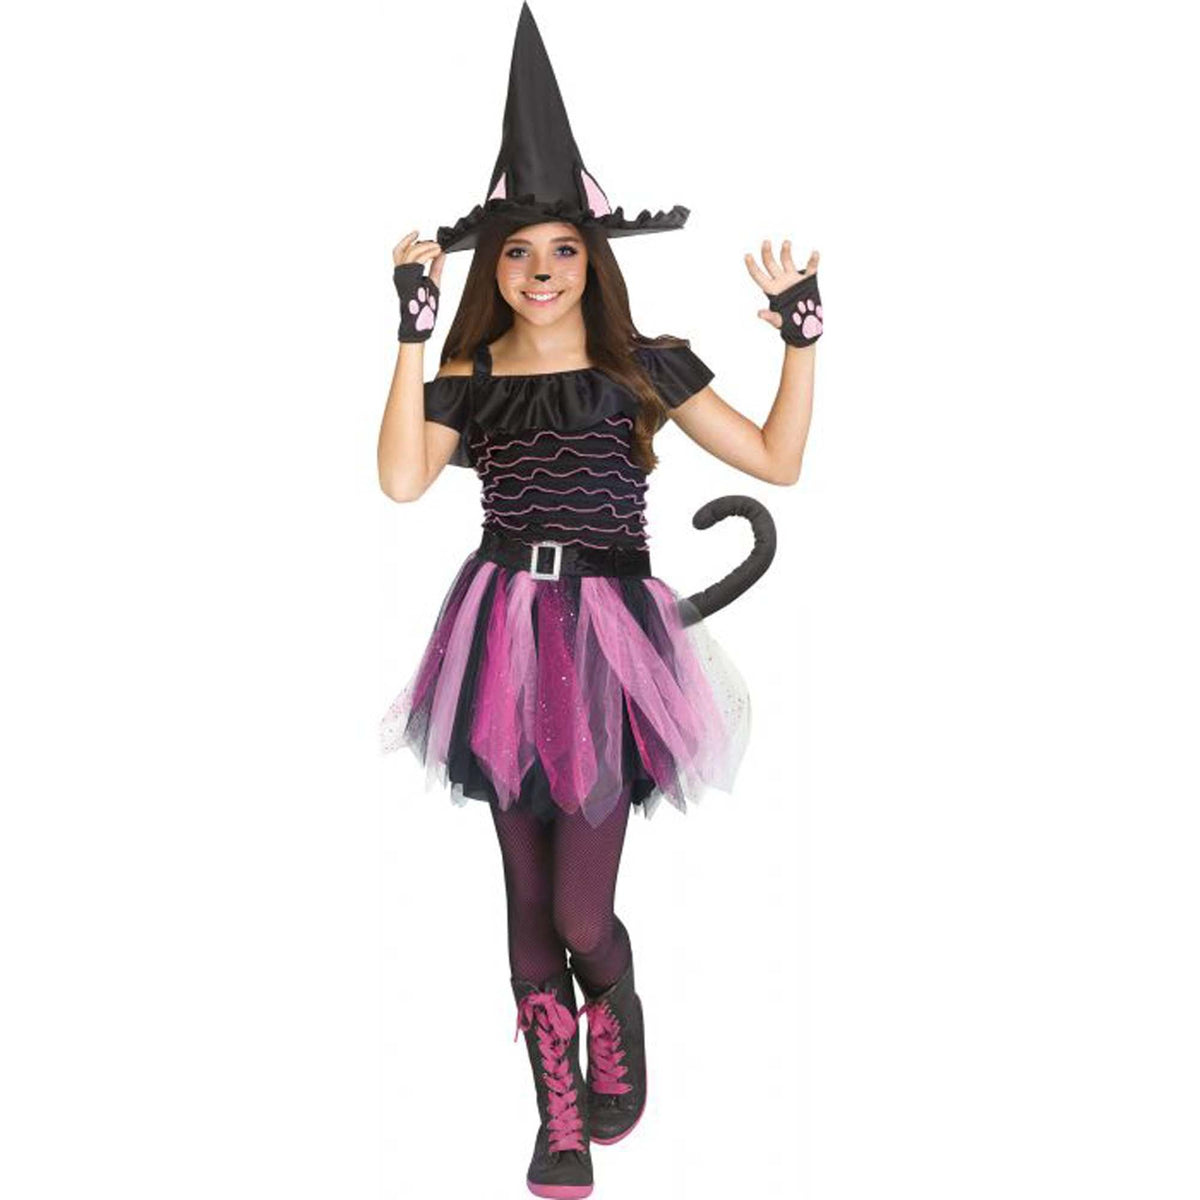 FUN WORLD Costumes Witchy Kitty Costume for Kids, Pink and Black Dress